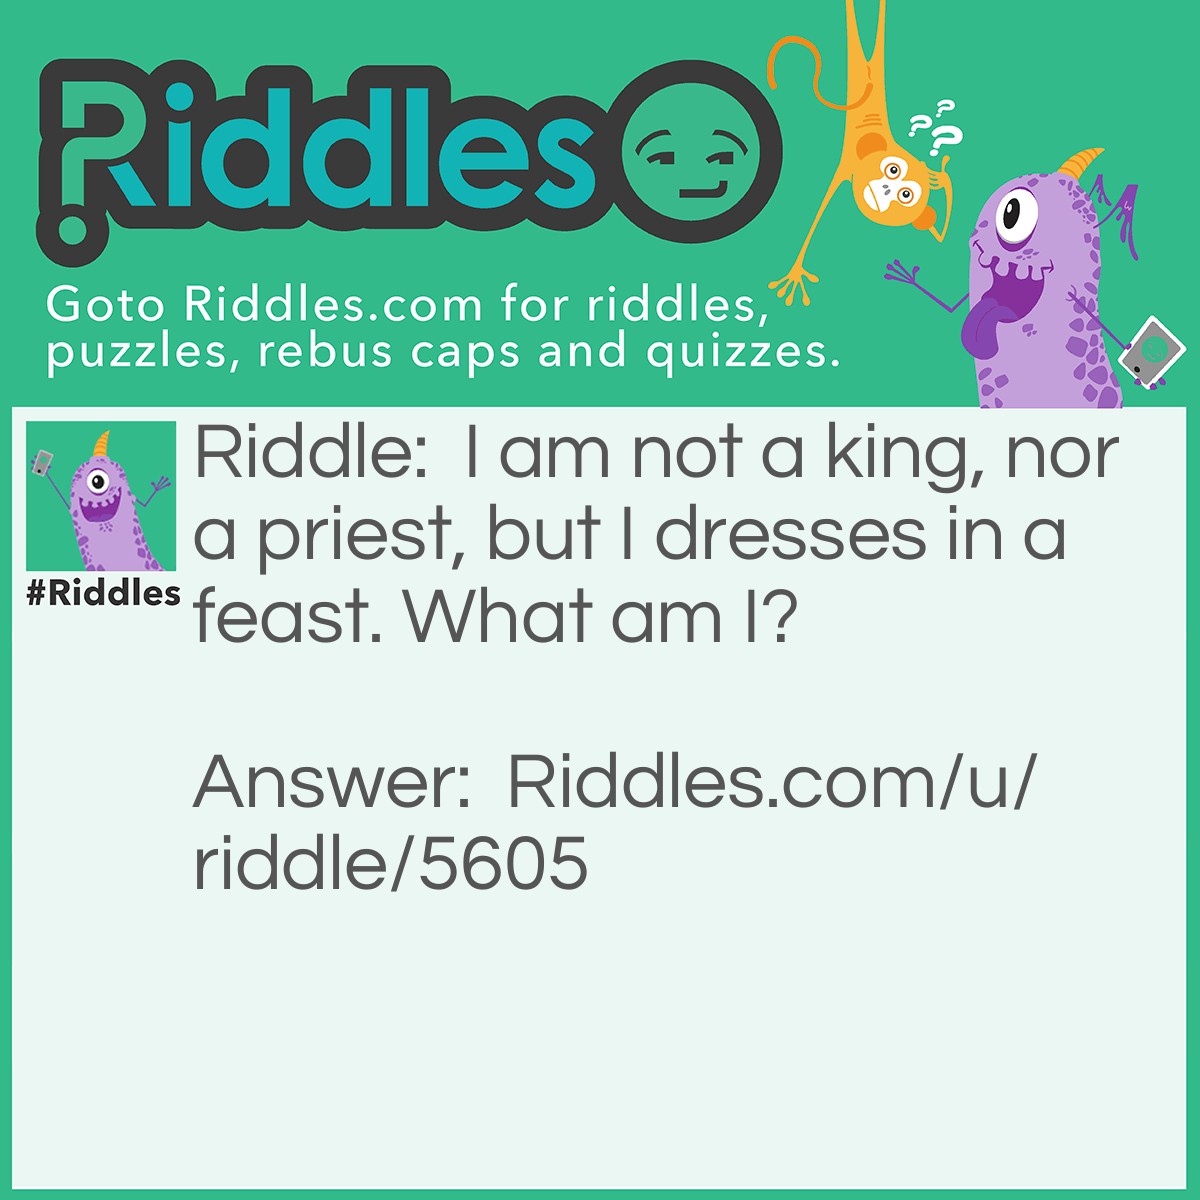 Riddle: I am not a king, nor a priest, but I dresses in a feast. What am I? Answer: Clothes-line